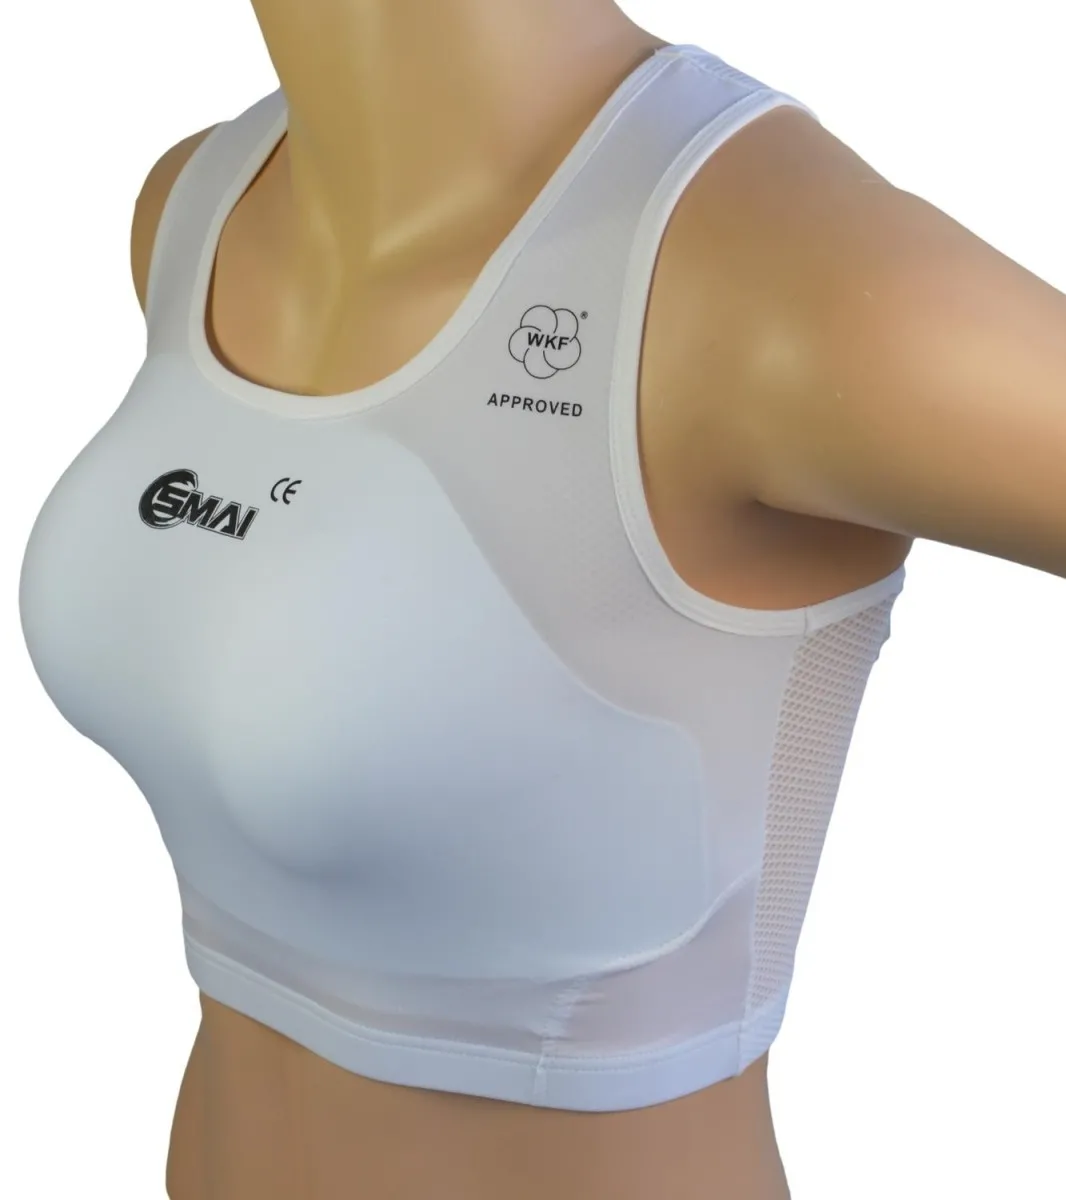 Ladies chest protector from SMAI WKF approved